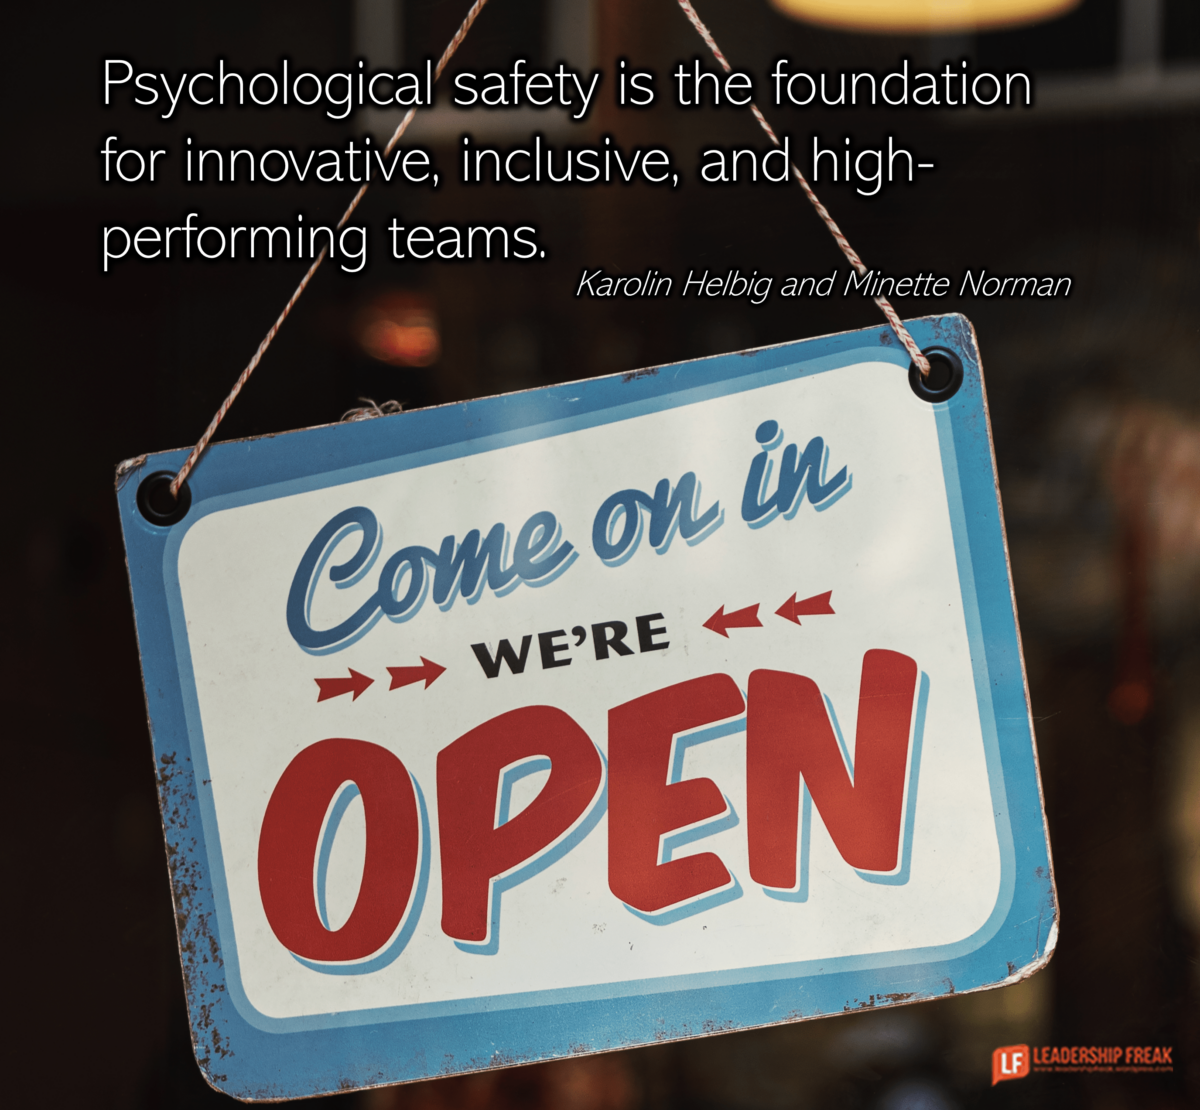 5 WAYS TO BUILD A GREAT TEAM CULTURE BY INCREASING PSYCHOLOGICAL SAFETY